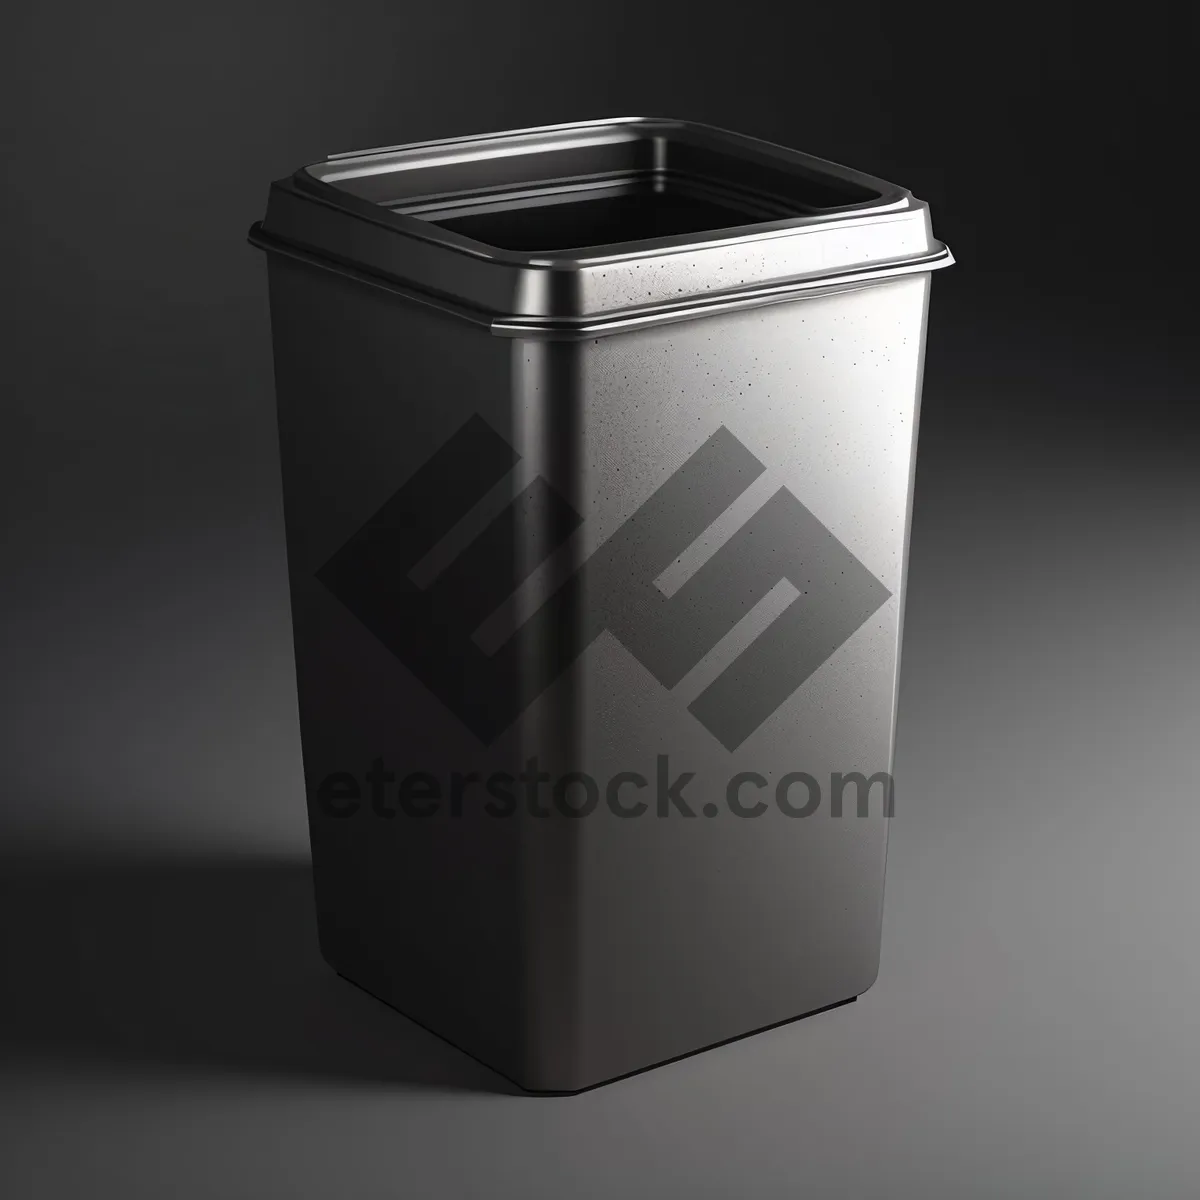 Picture of Efficient Garbage Container for Eco-Conscious Conservation.